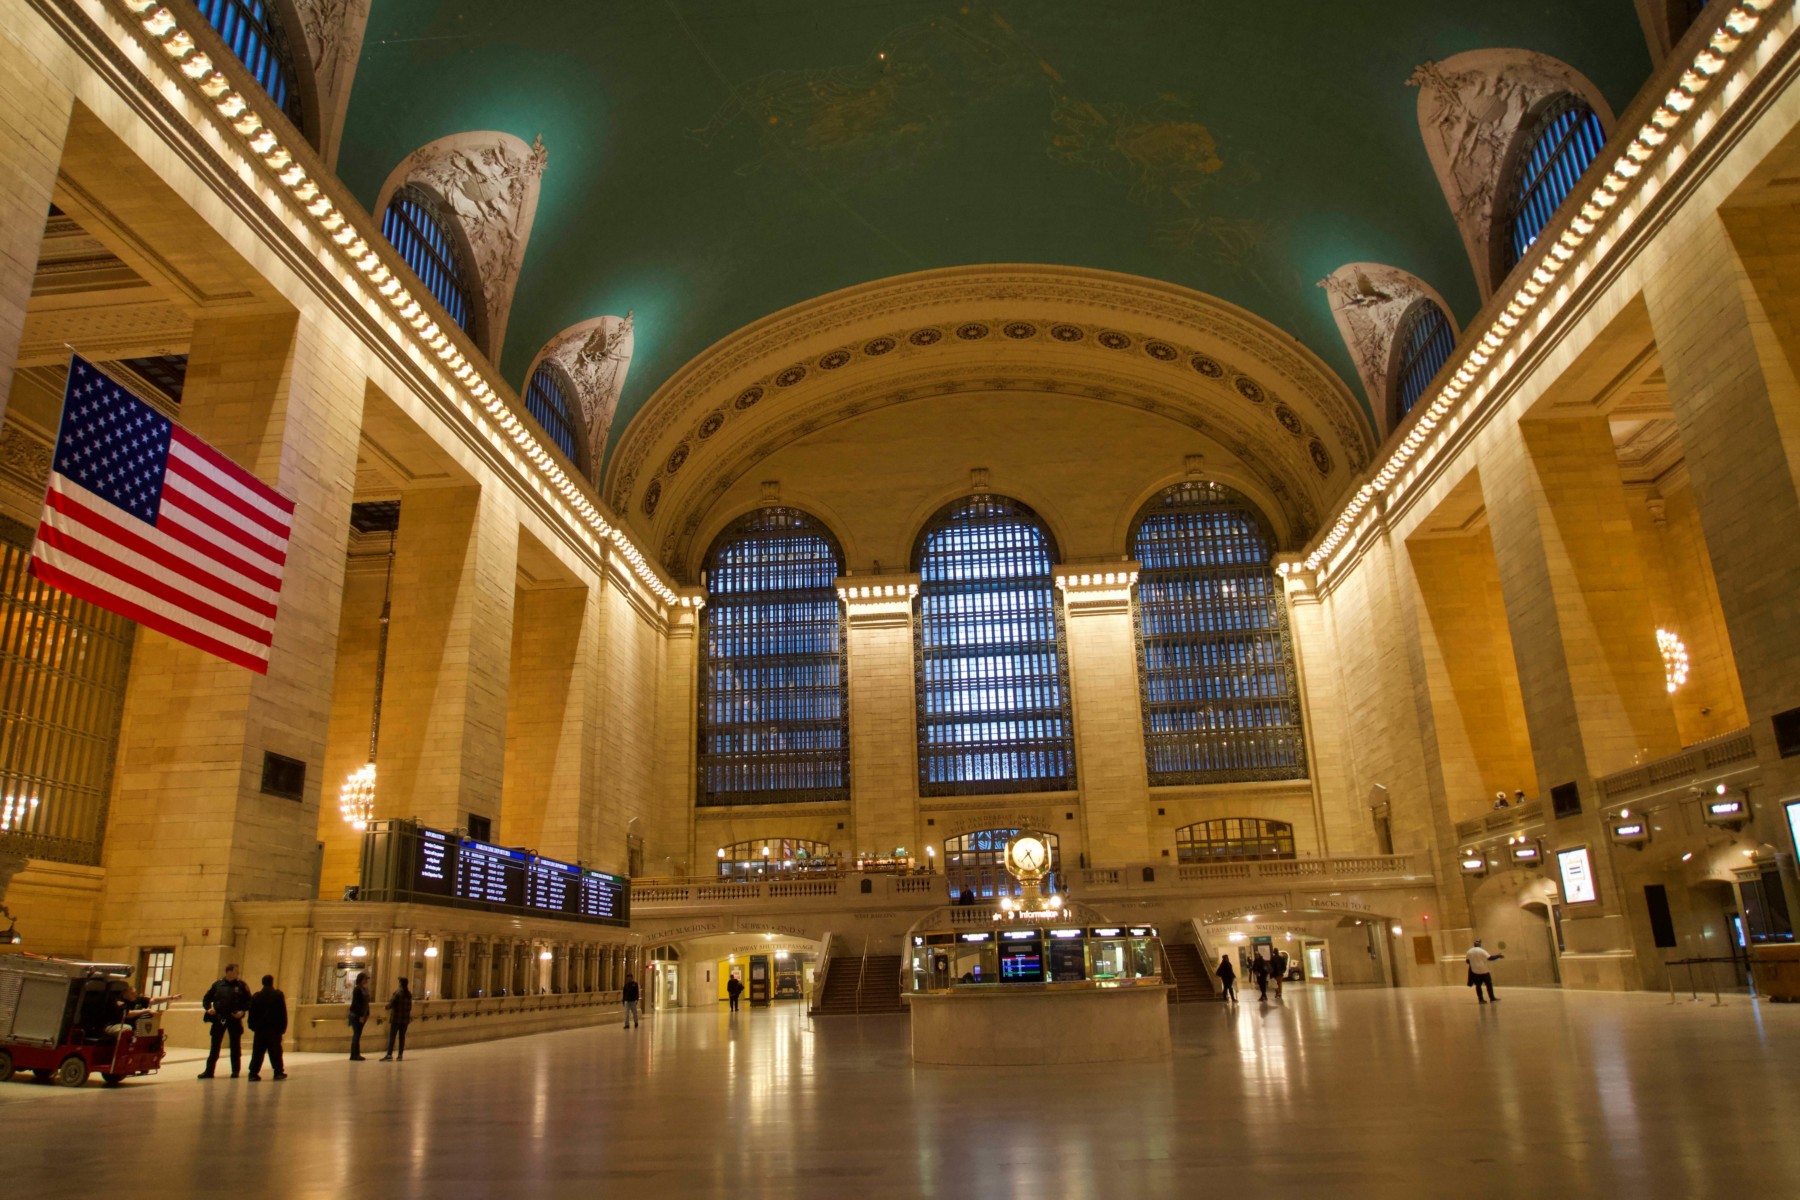 Grand Central Station in the heart of Manhattan was nearly void of people